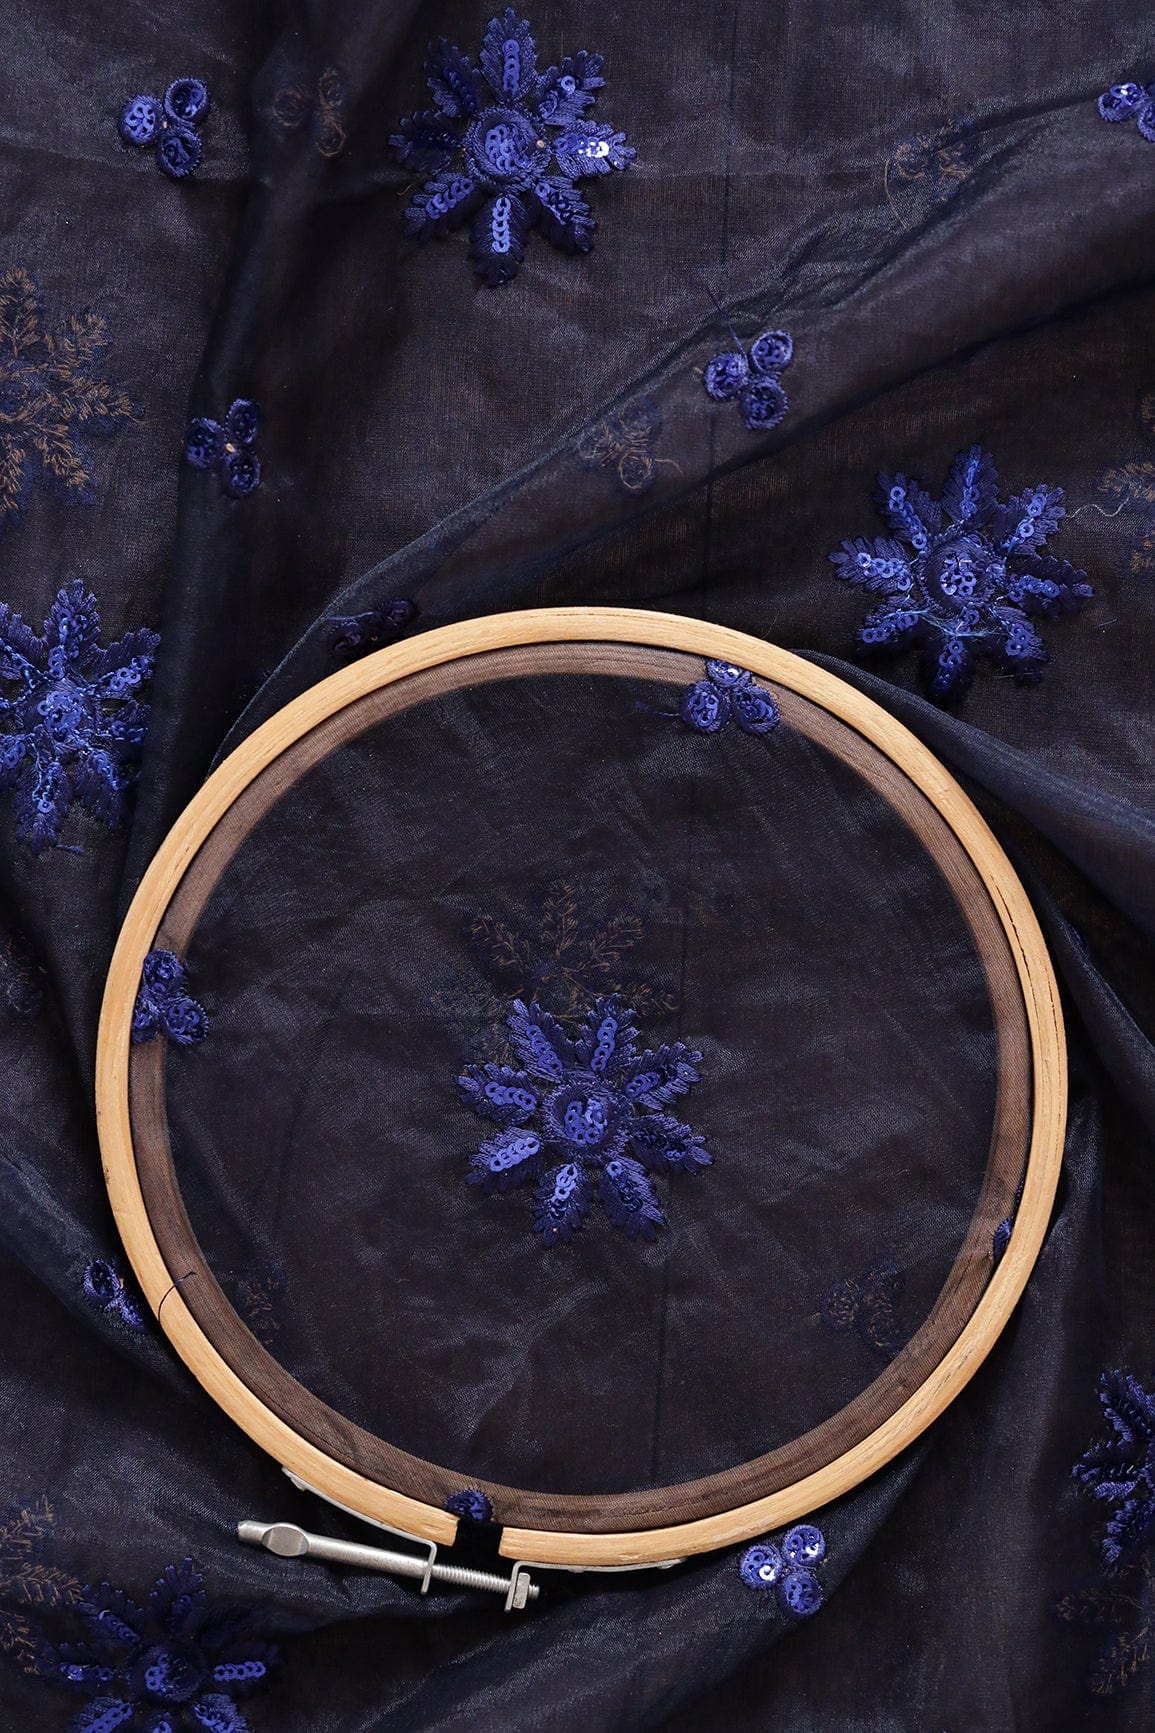 doeraa Embroidery Fabrics 1.75 Meter Cut Piece Of Blue Thread With Sequins Floral Embroidery Work On Dark Navy Blue Organza Fabric